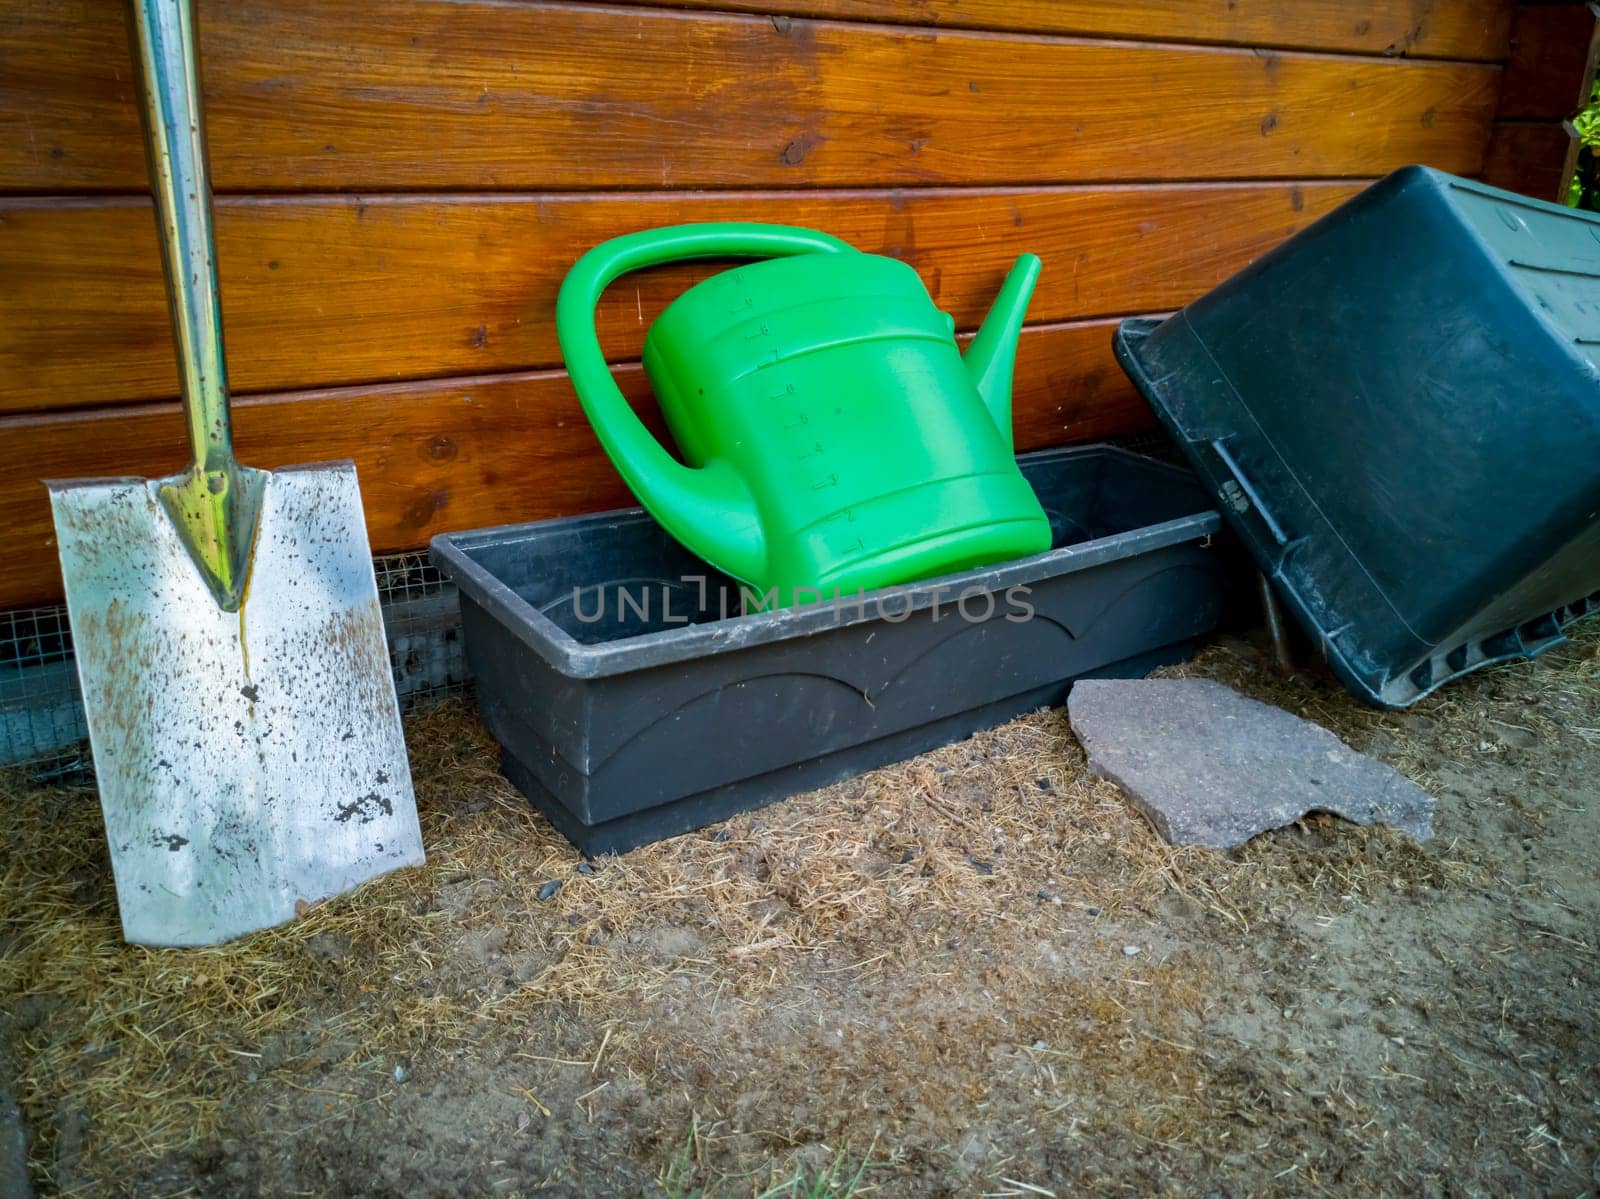 Gardening tools, watering can, shovel and pots.